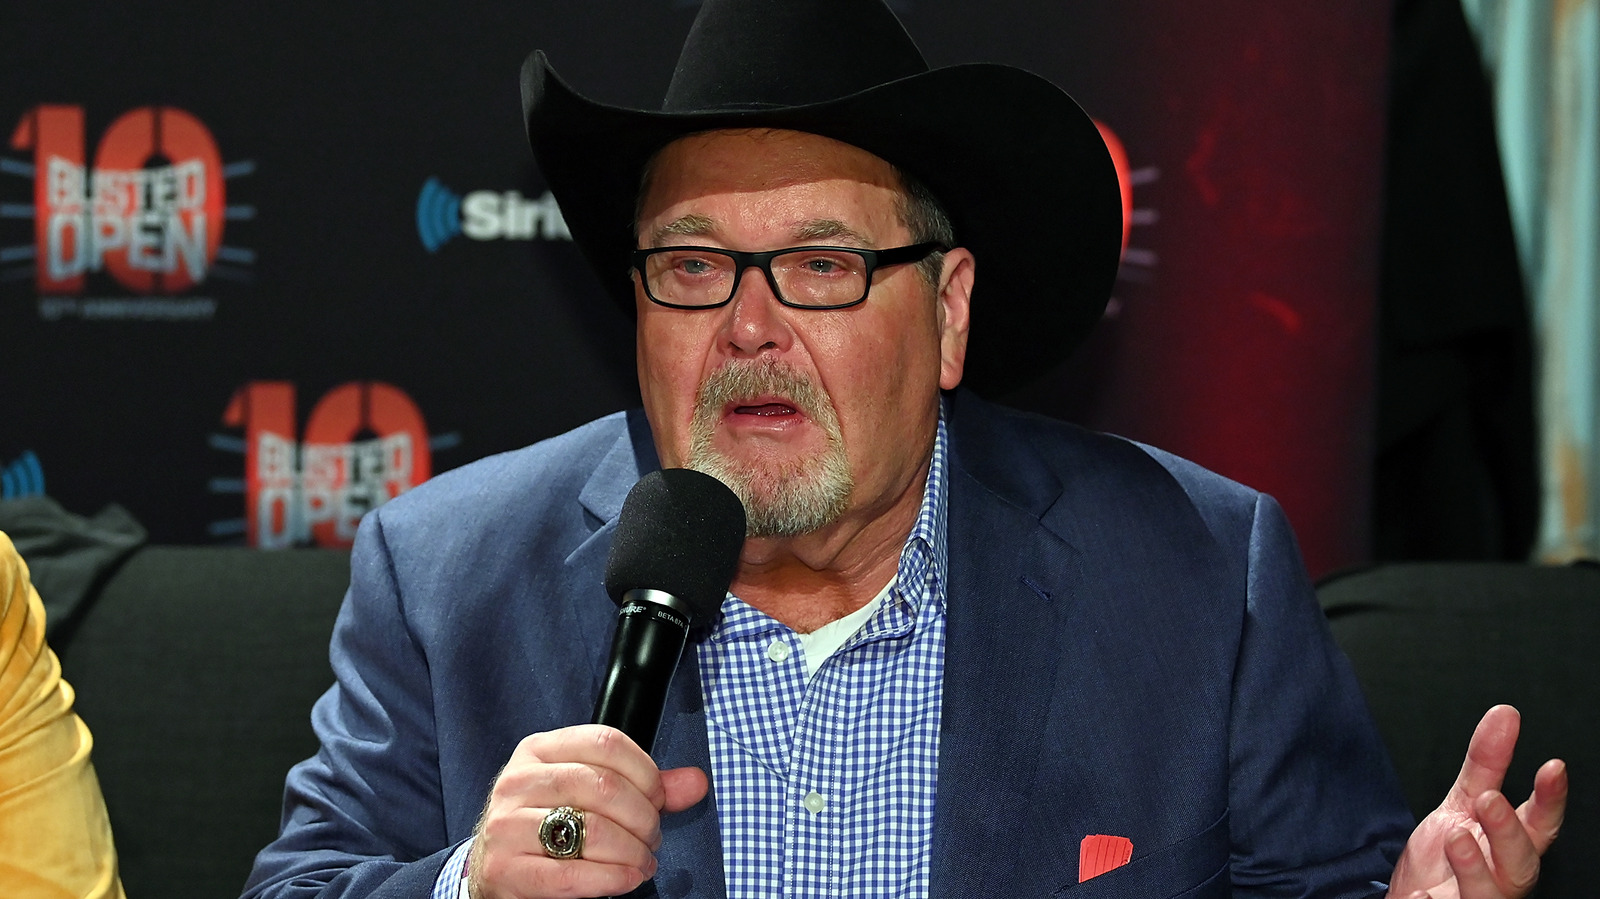 Jim Ross Calls This WWE Hall Of Famer One Of His Best Hires